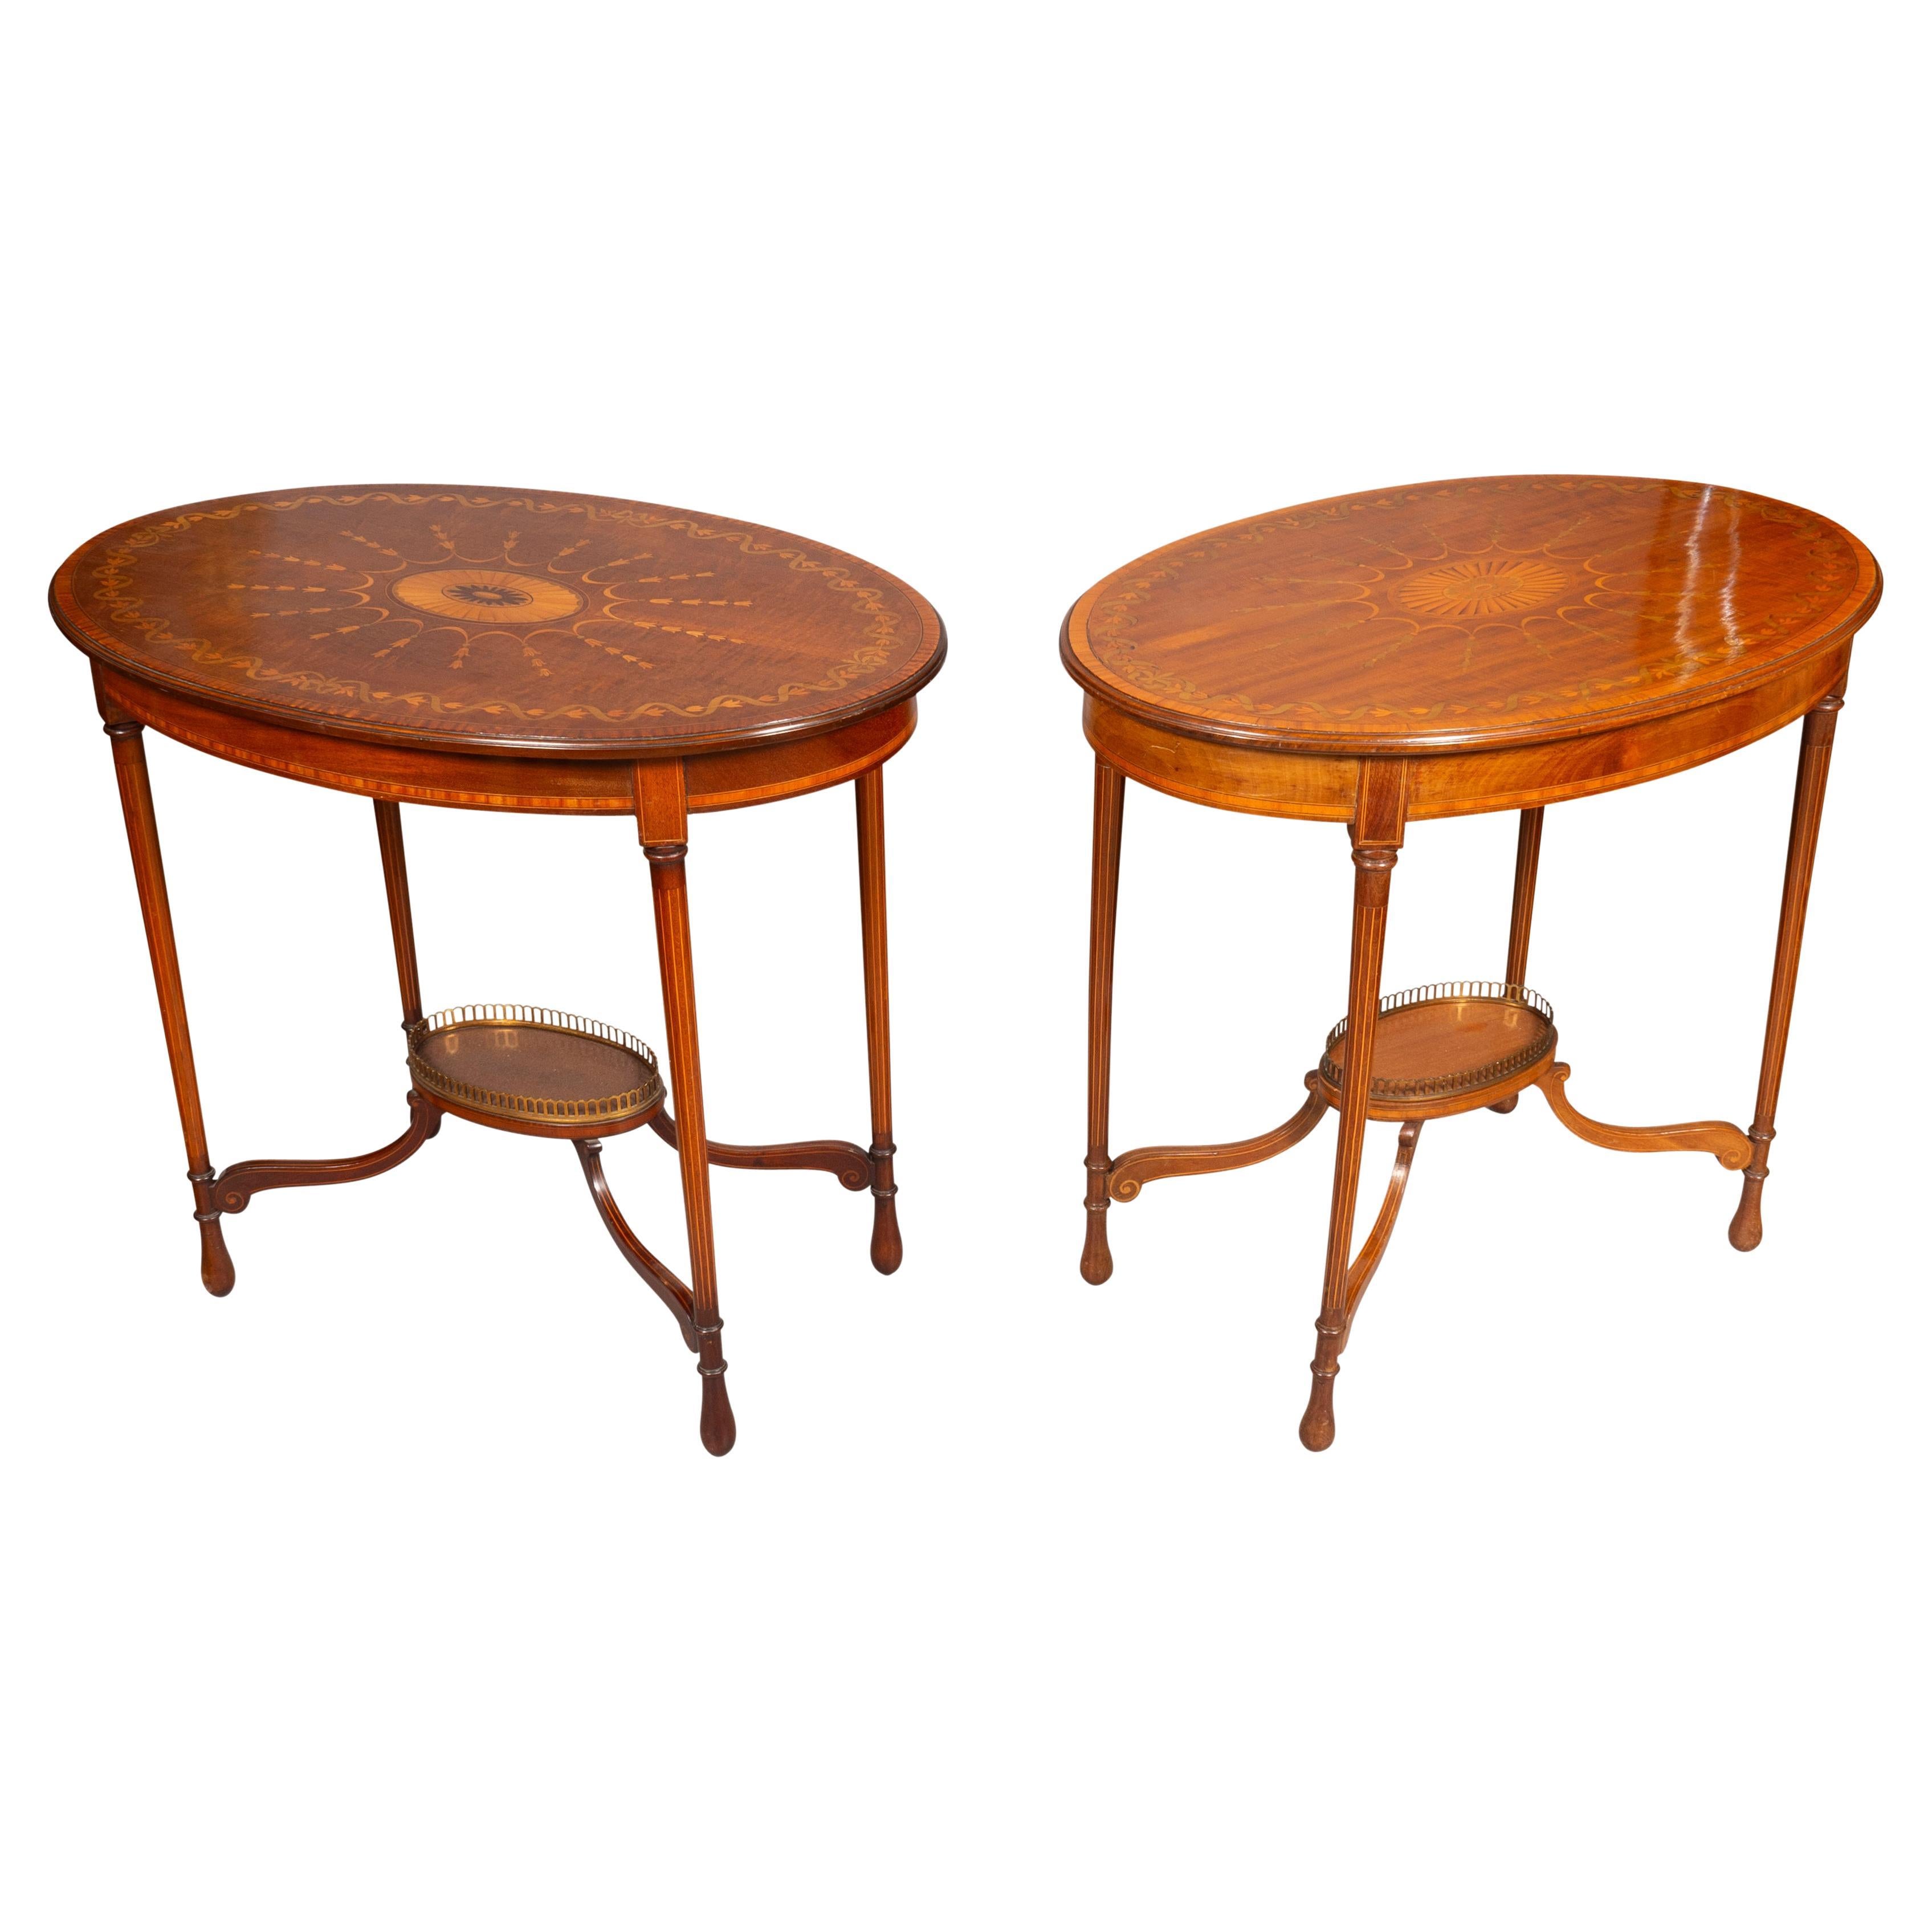 Pair Of Edwardian Mahogany And Inlaid End Tables